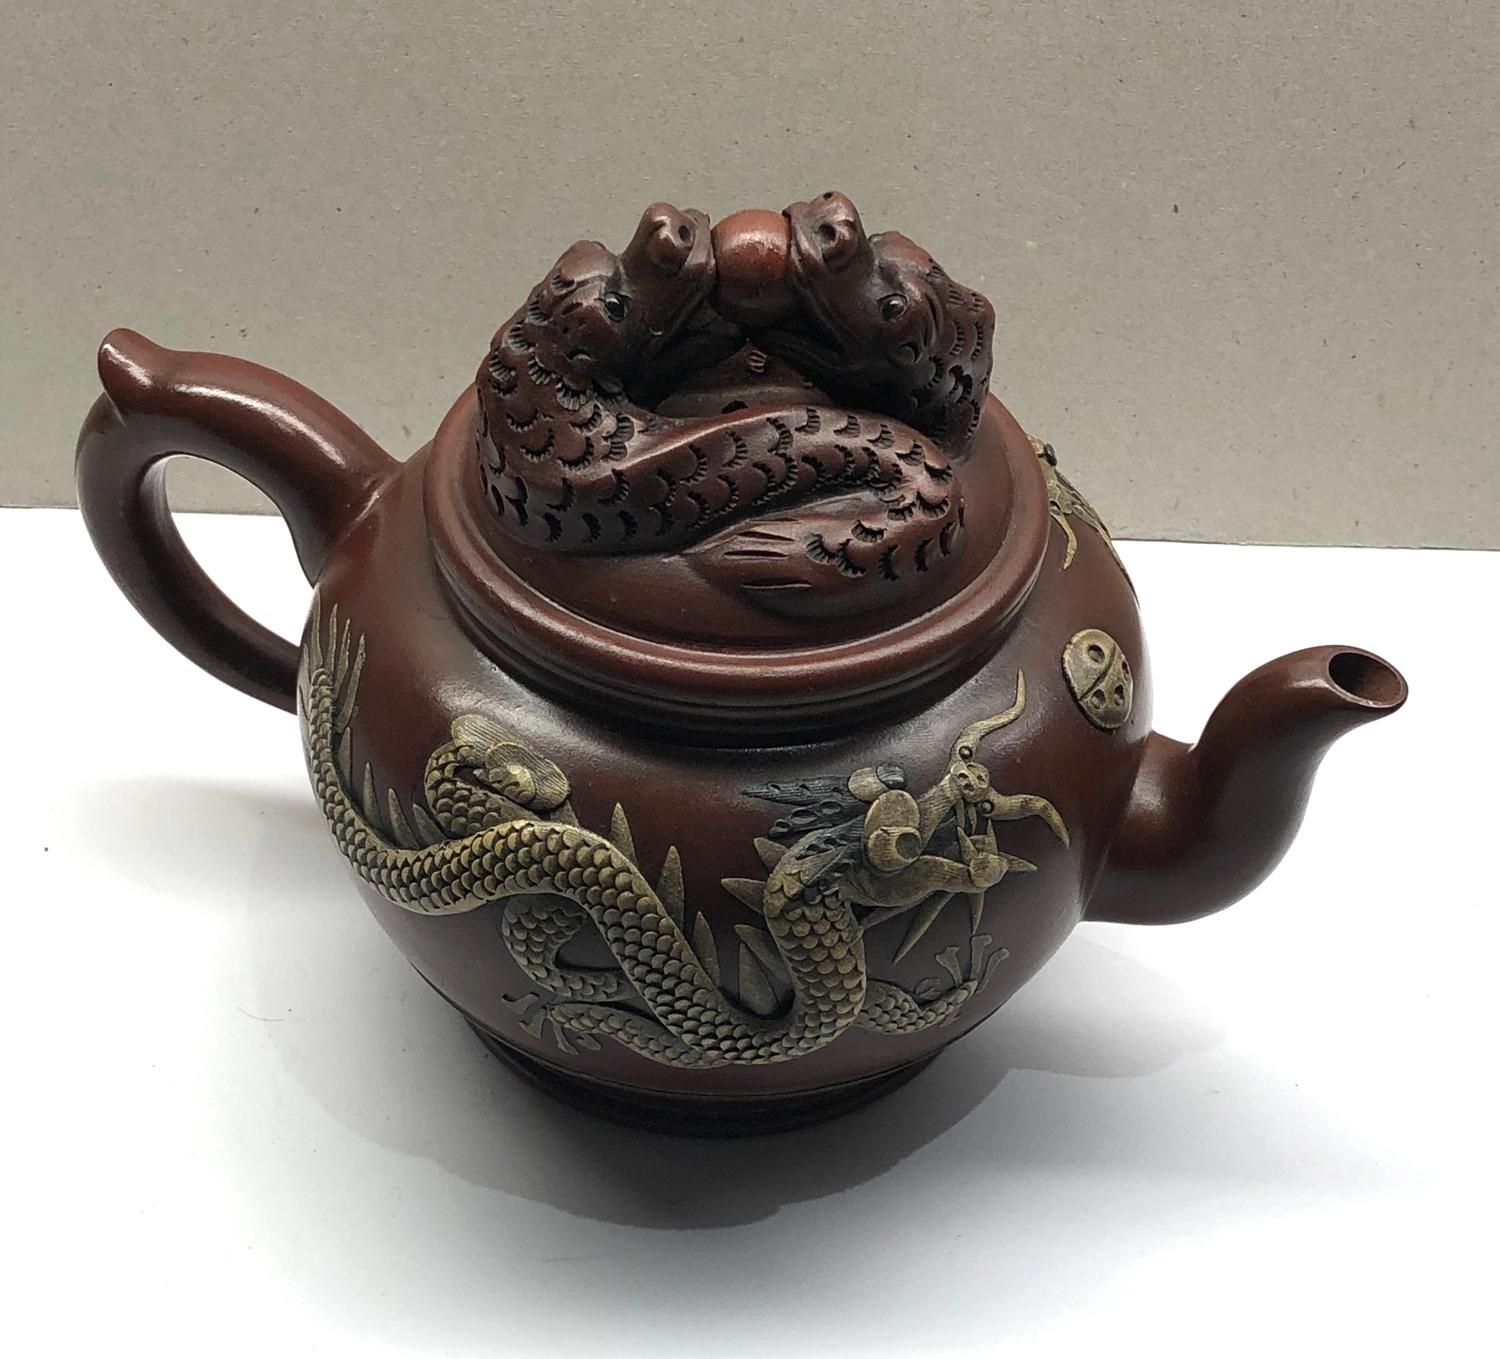 Chinese stone ware dragon teapot - Image 2 of 4